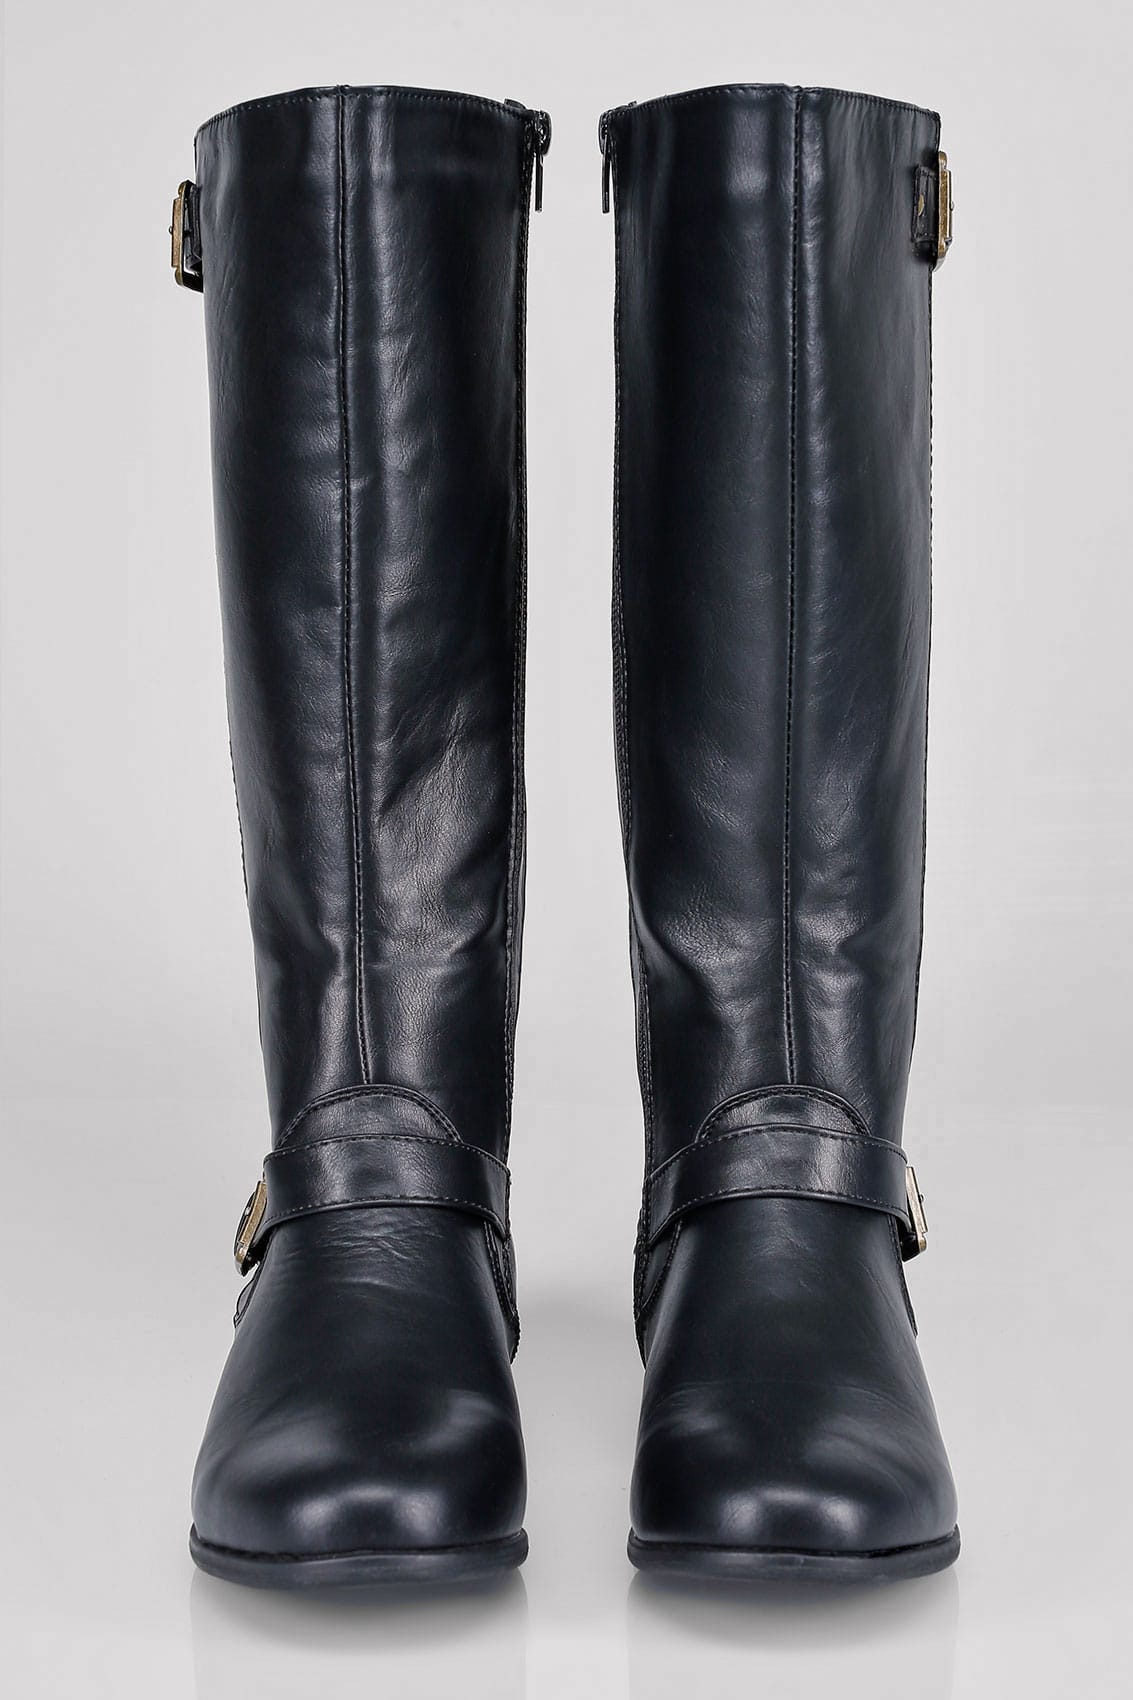 Black Knee High Riding Boots With Buckle Detail With XL Calf Fitting In ...